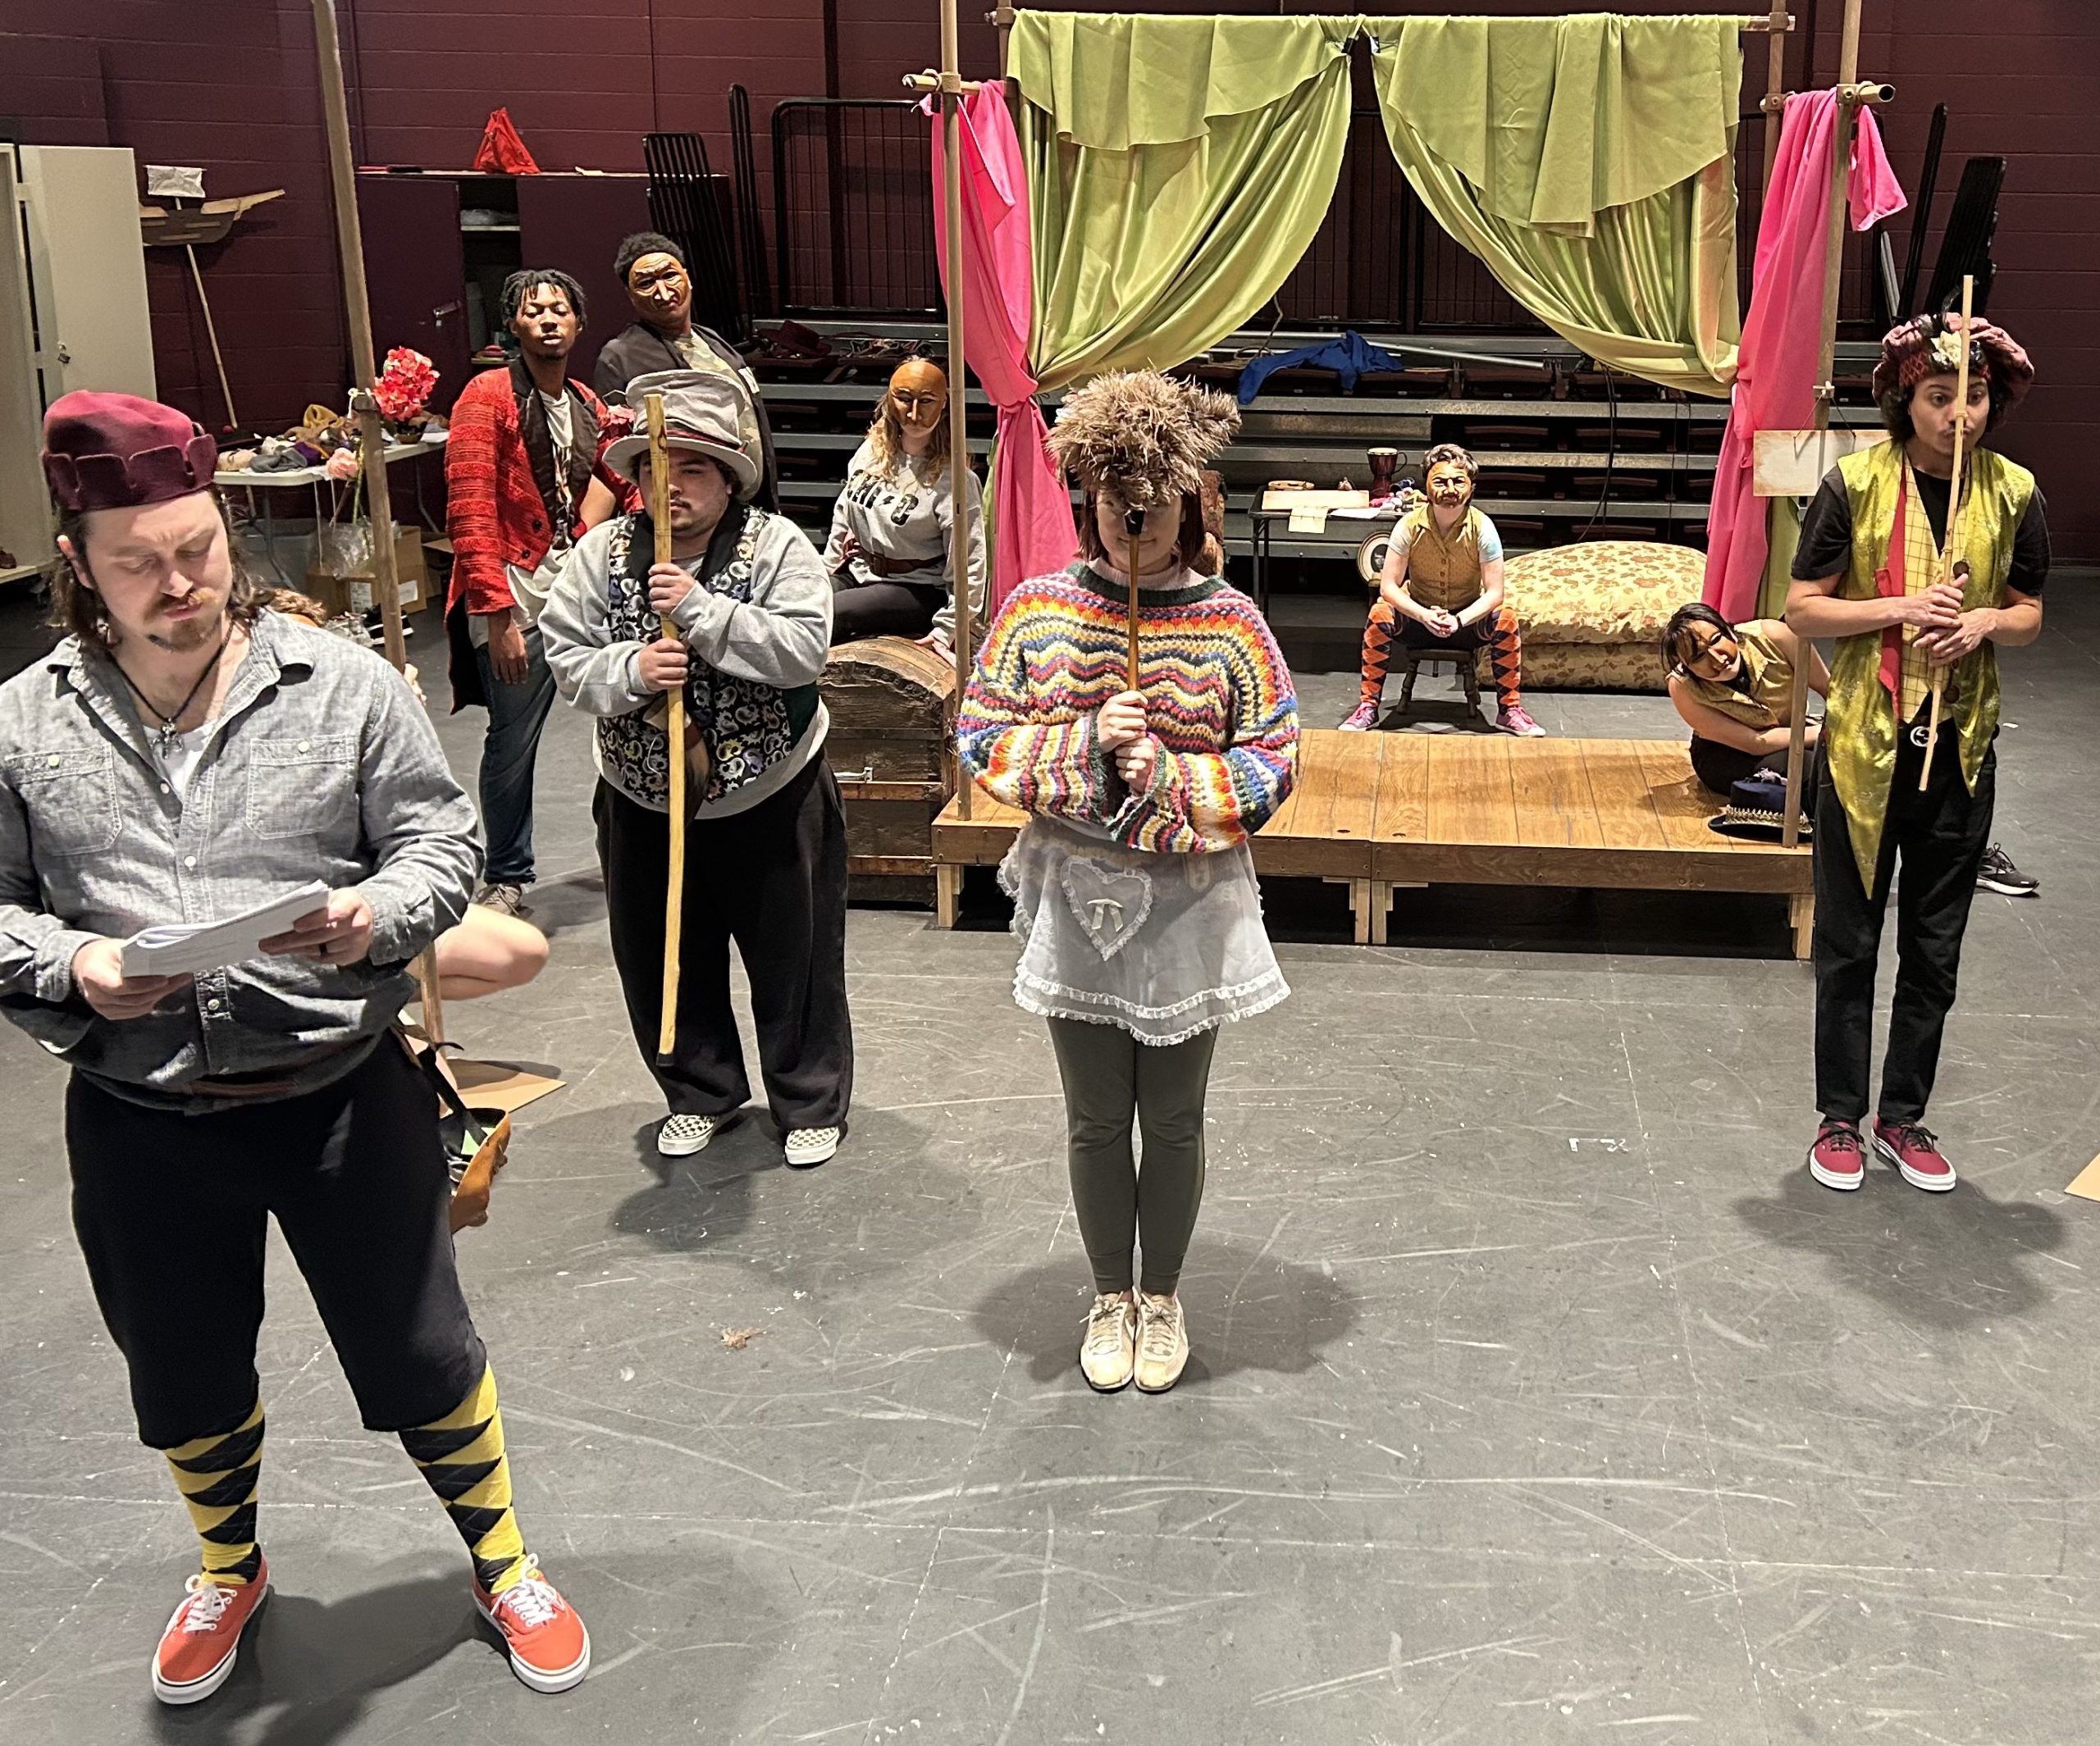 UA Little Rock students rehearse their upcoming performance of Shakespeare's "Twelfth Night" in the Center for Performing Arts.